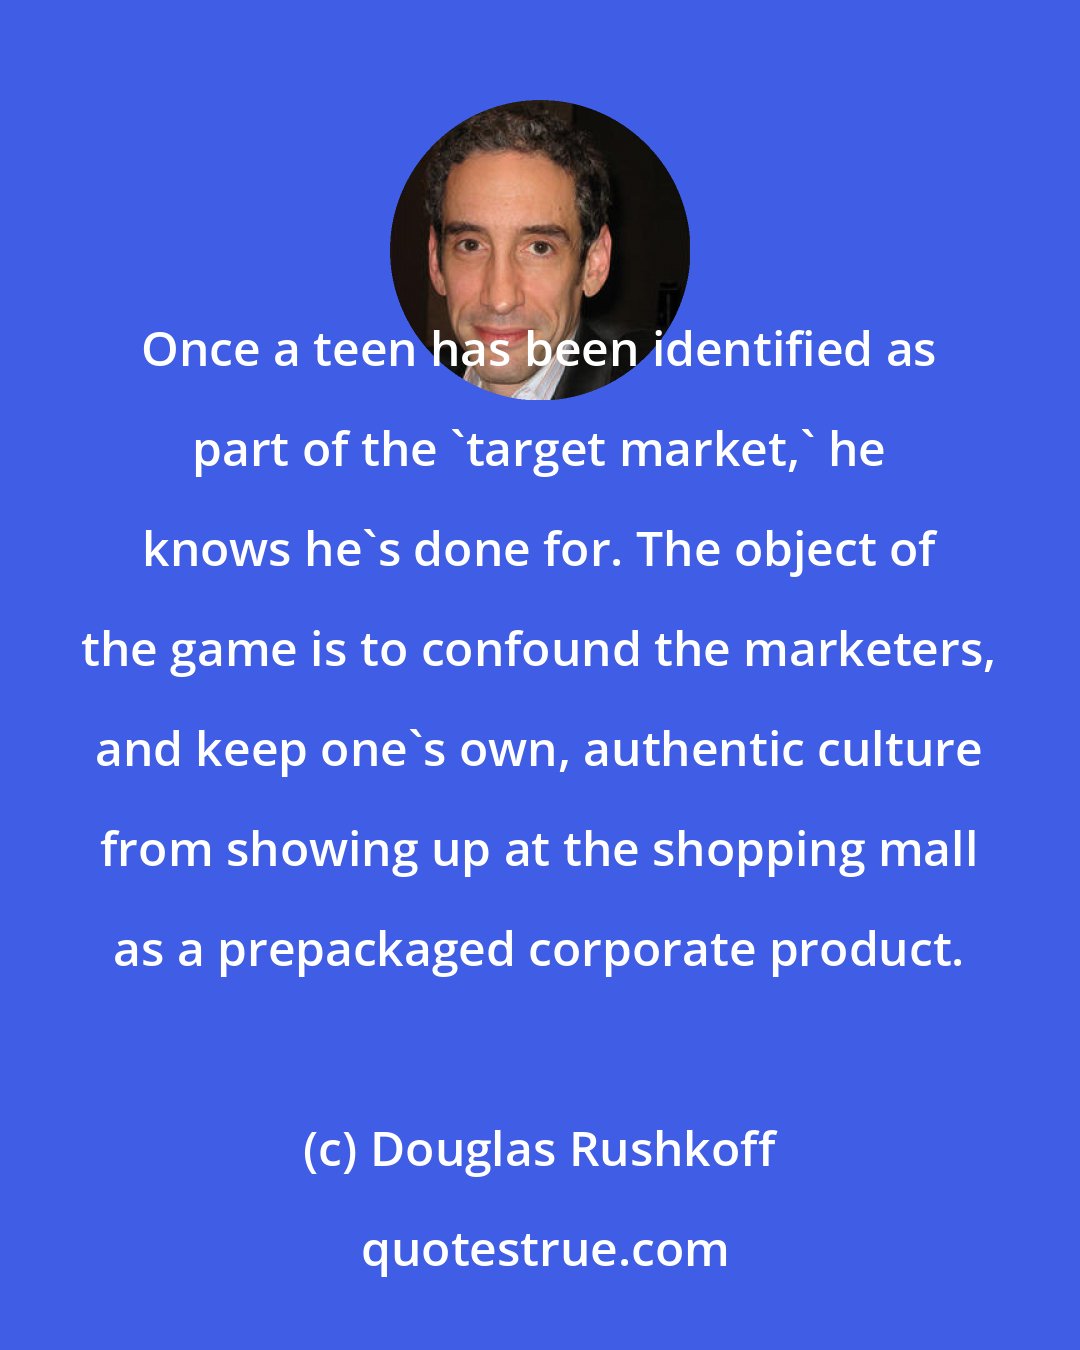 Douglas Rushkoff: Once a teen has been identified as part of the 'target market,' he knows he's done for. The object of the game is to confound the marketers, and keep one's own, authentic culture from showing up at the shopping mall as a prepackaged corporate product.